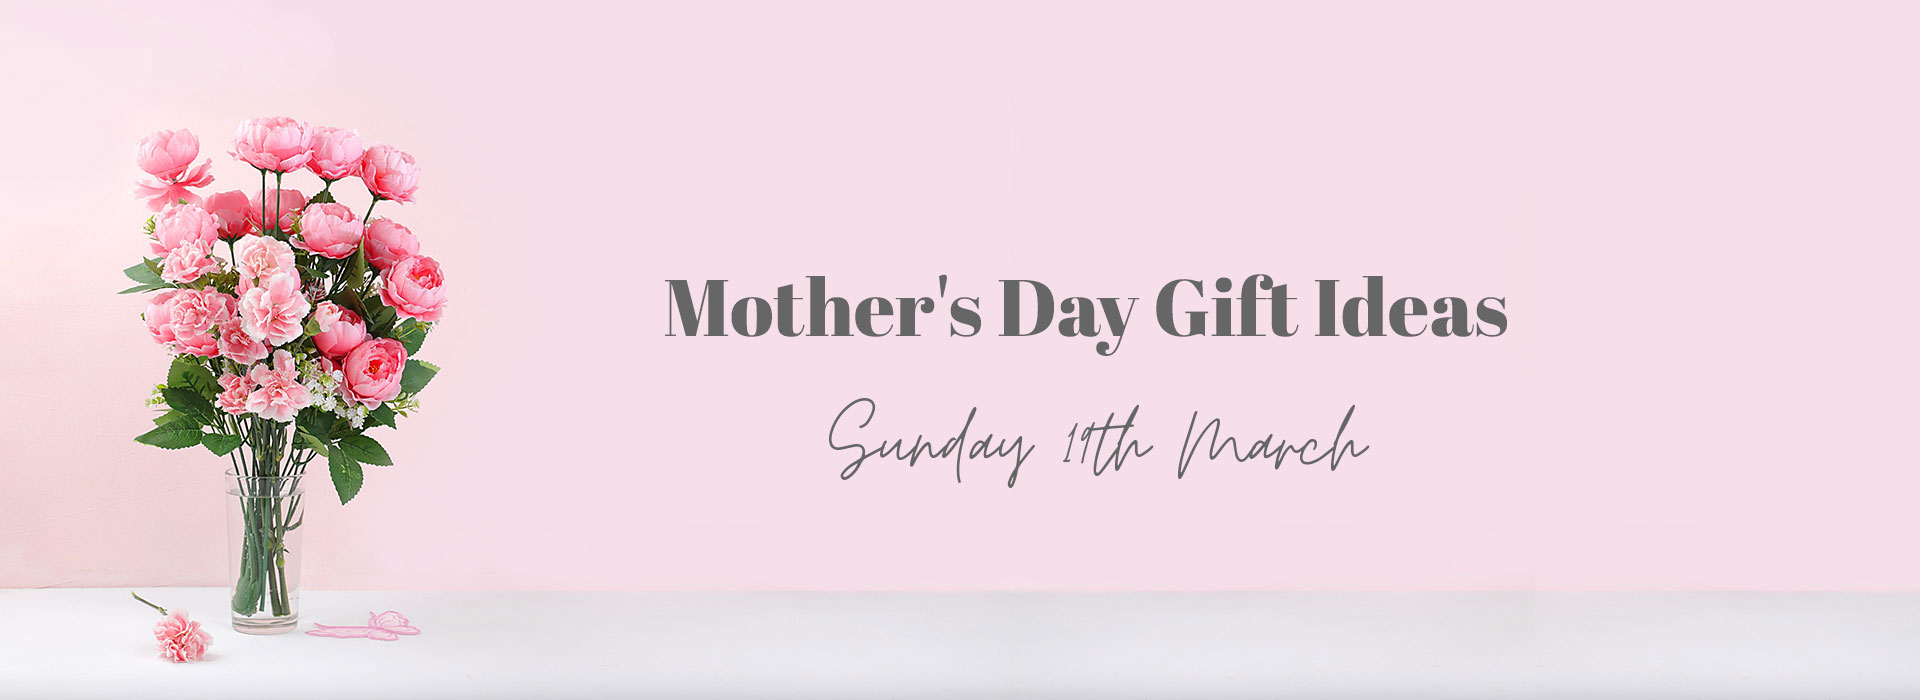 Mother's Day Gift Ideas Essex